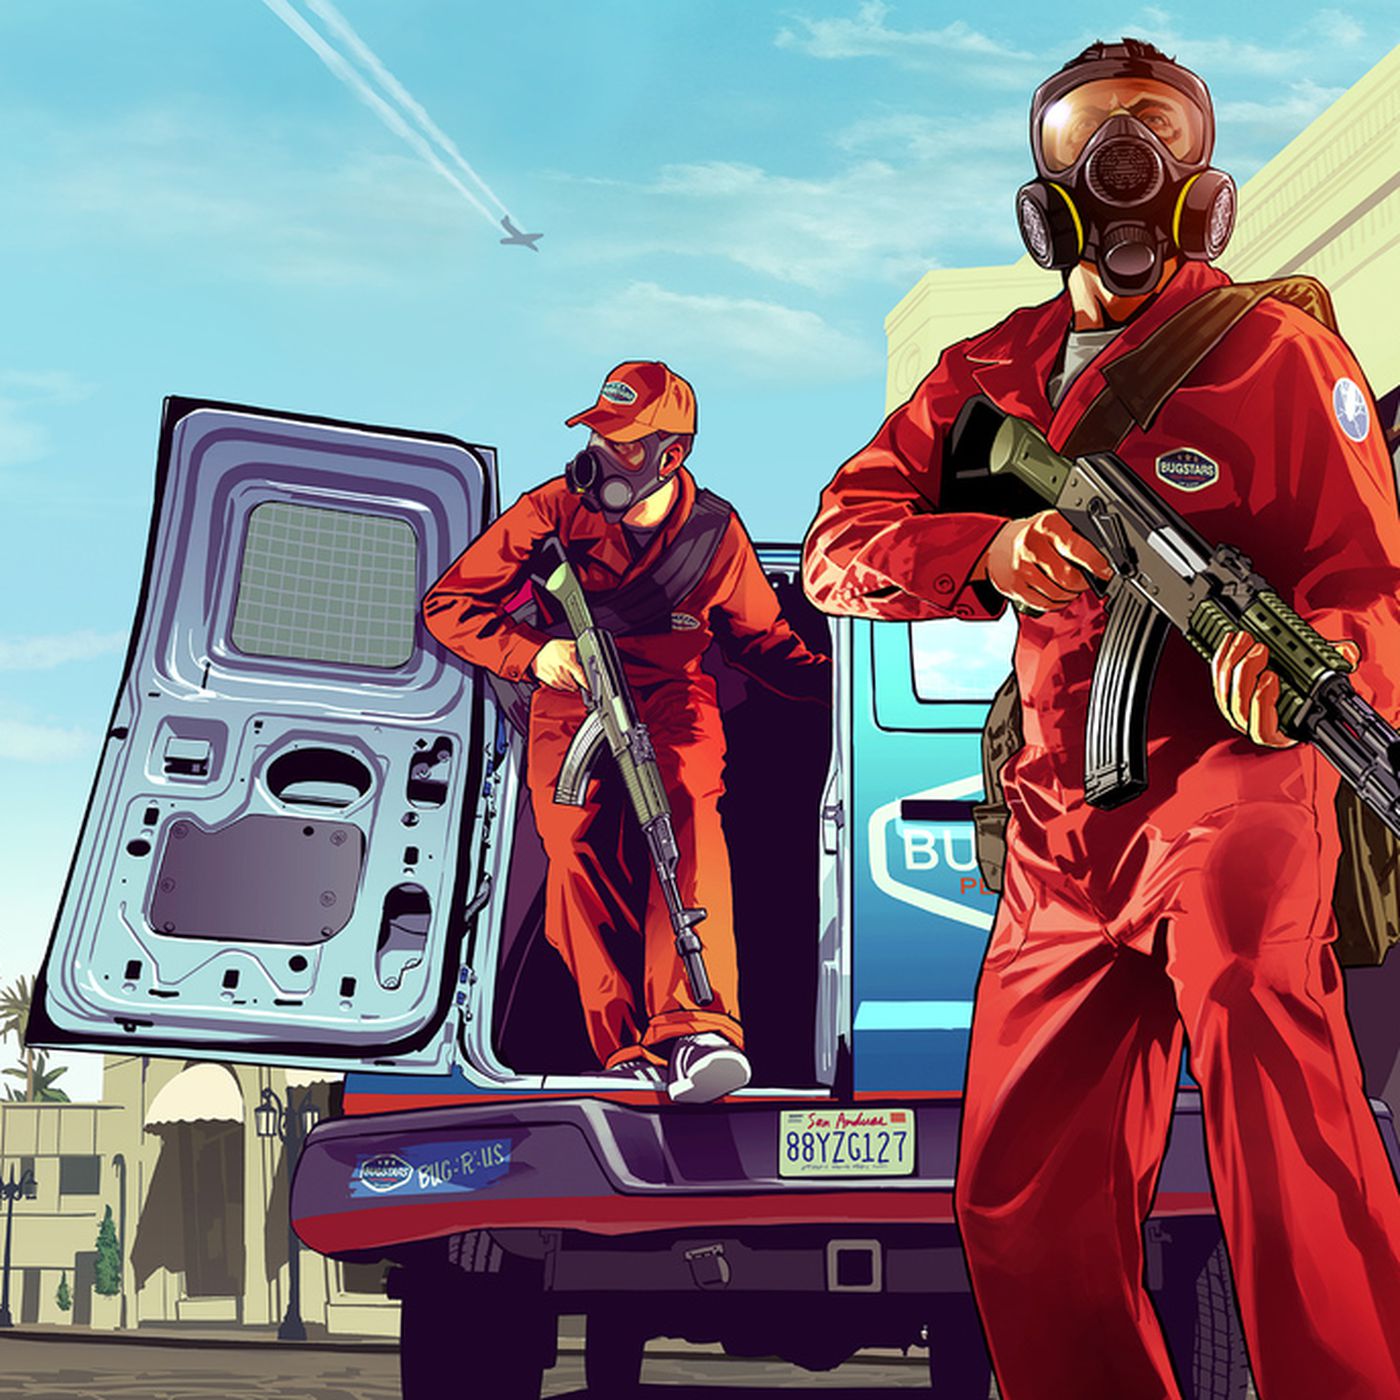 30+ Grand Theft Auto VI HD Wallpapers and Backgrounds